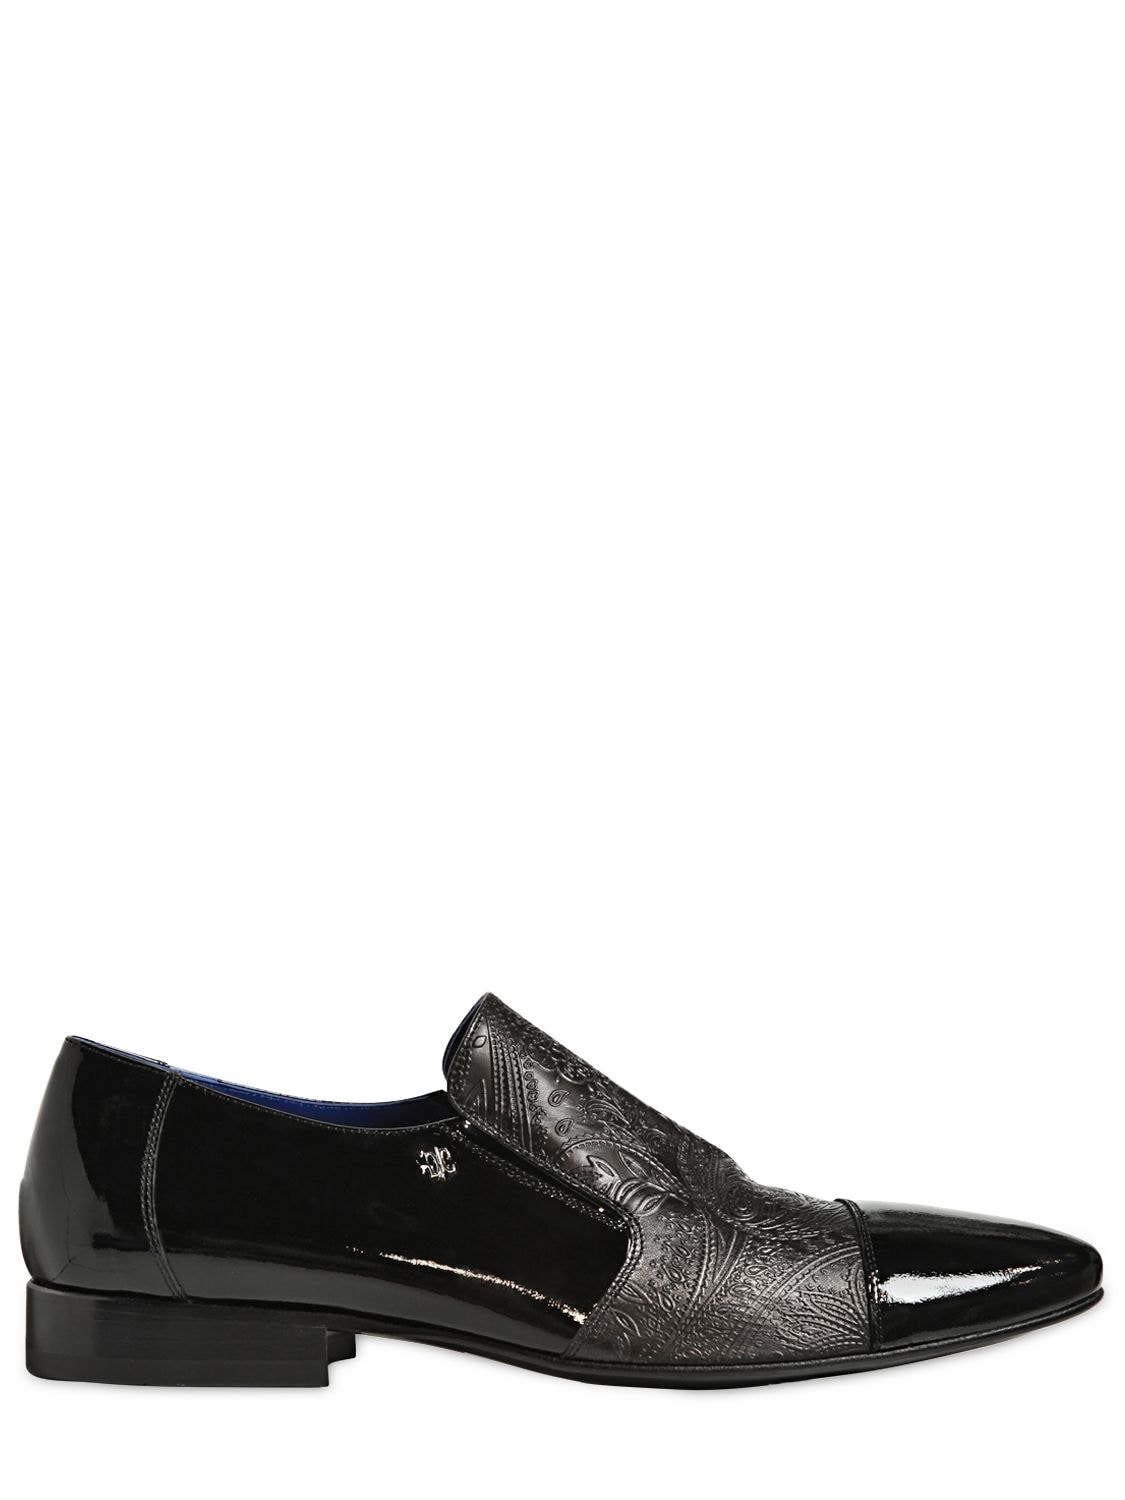 Giovanni Conti Embossed Leather&patent Slip On Loafers In Black/bronze